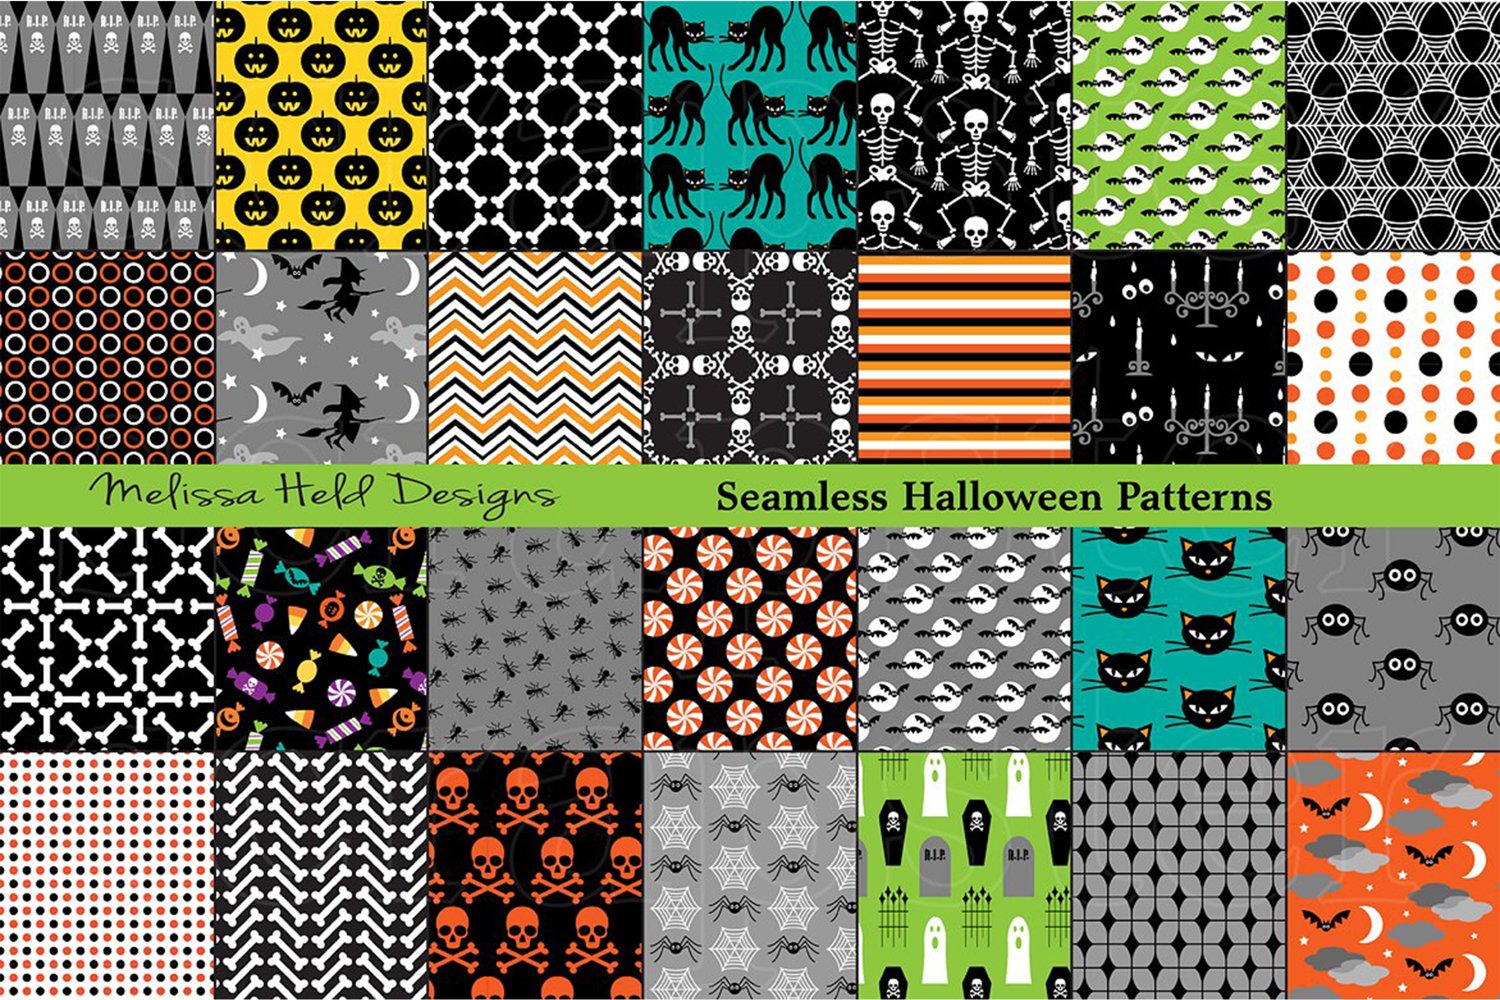 Cover image of Seamless Halloween Patterns.